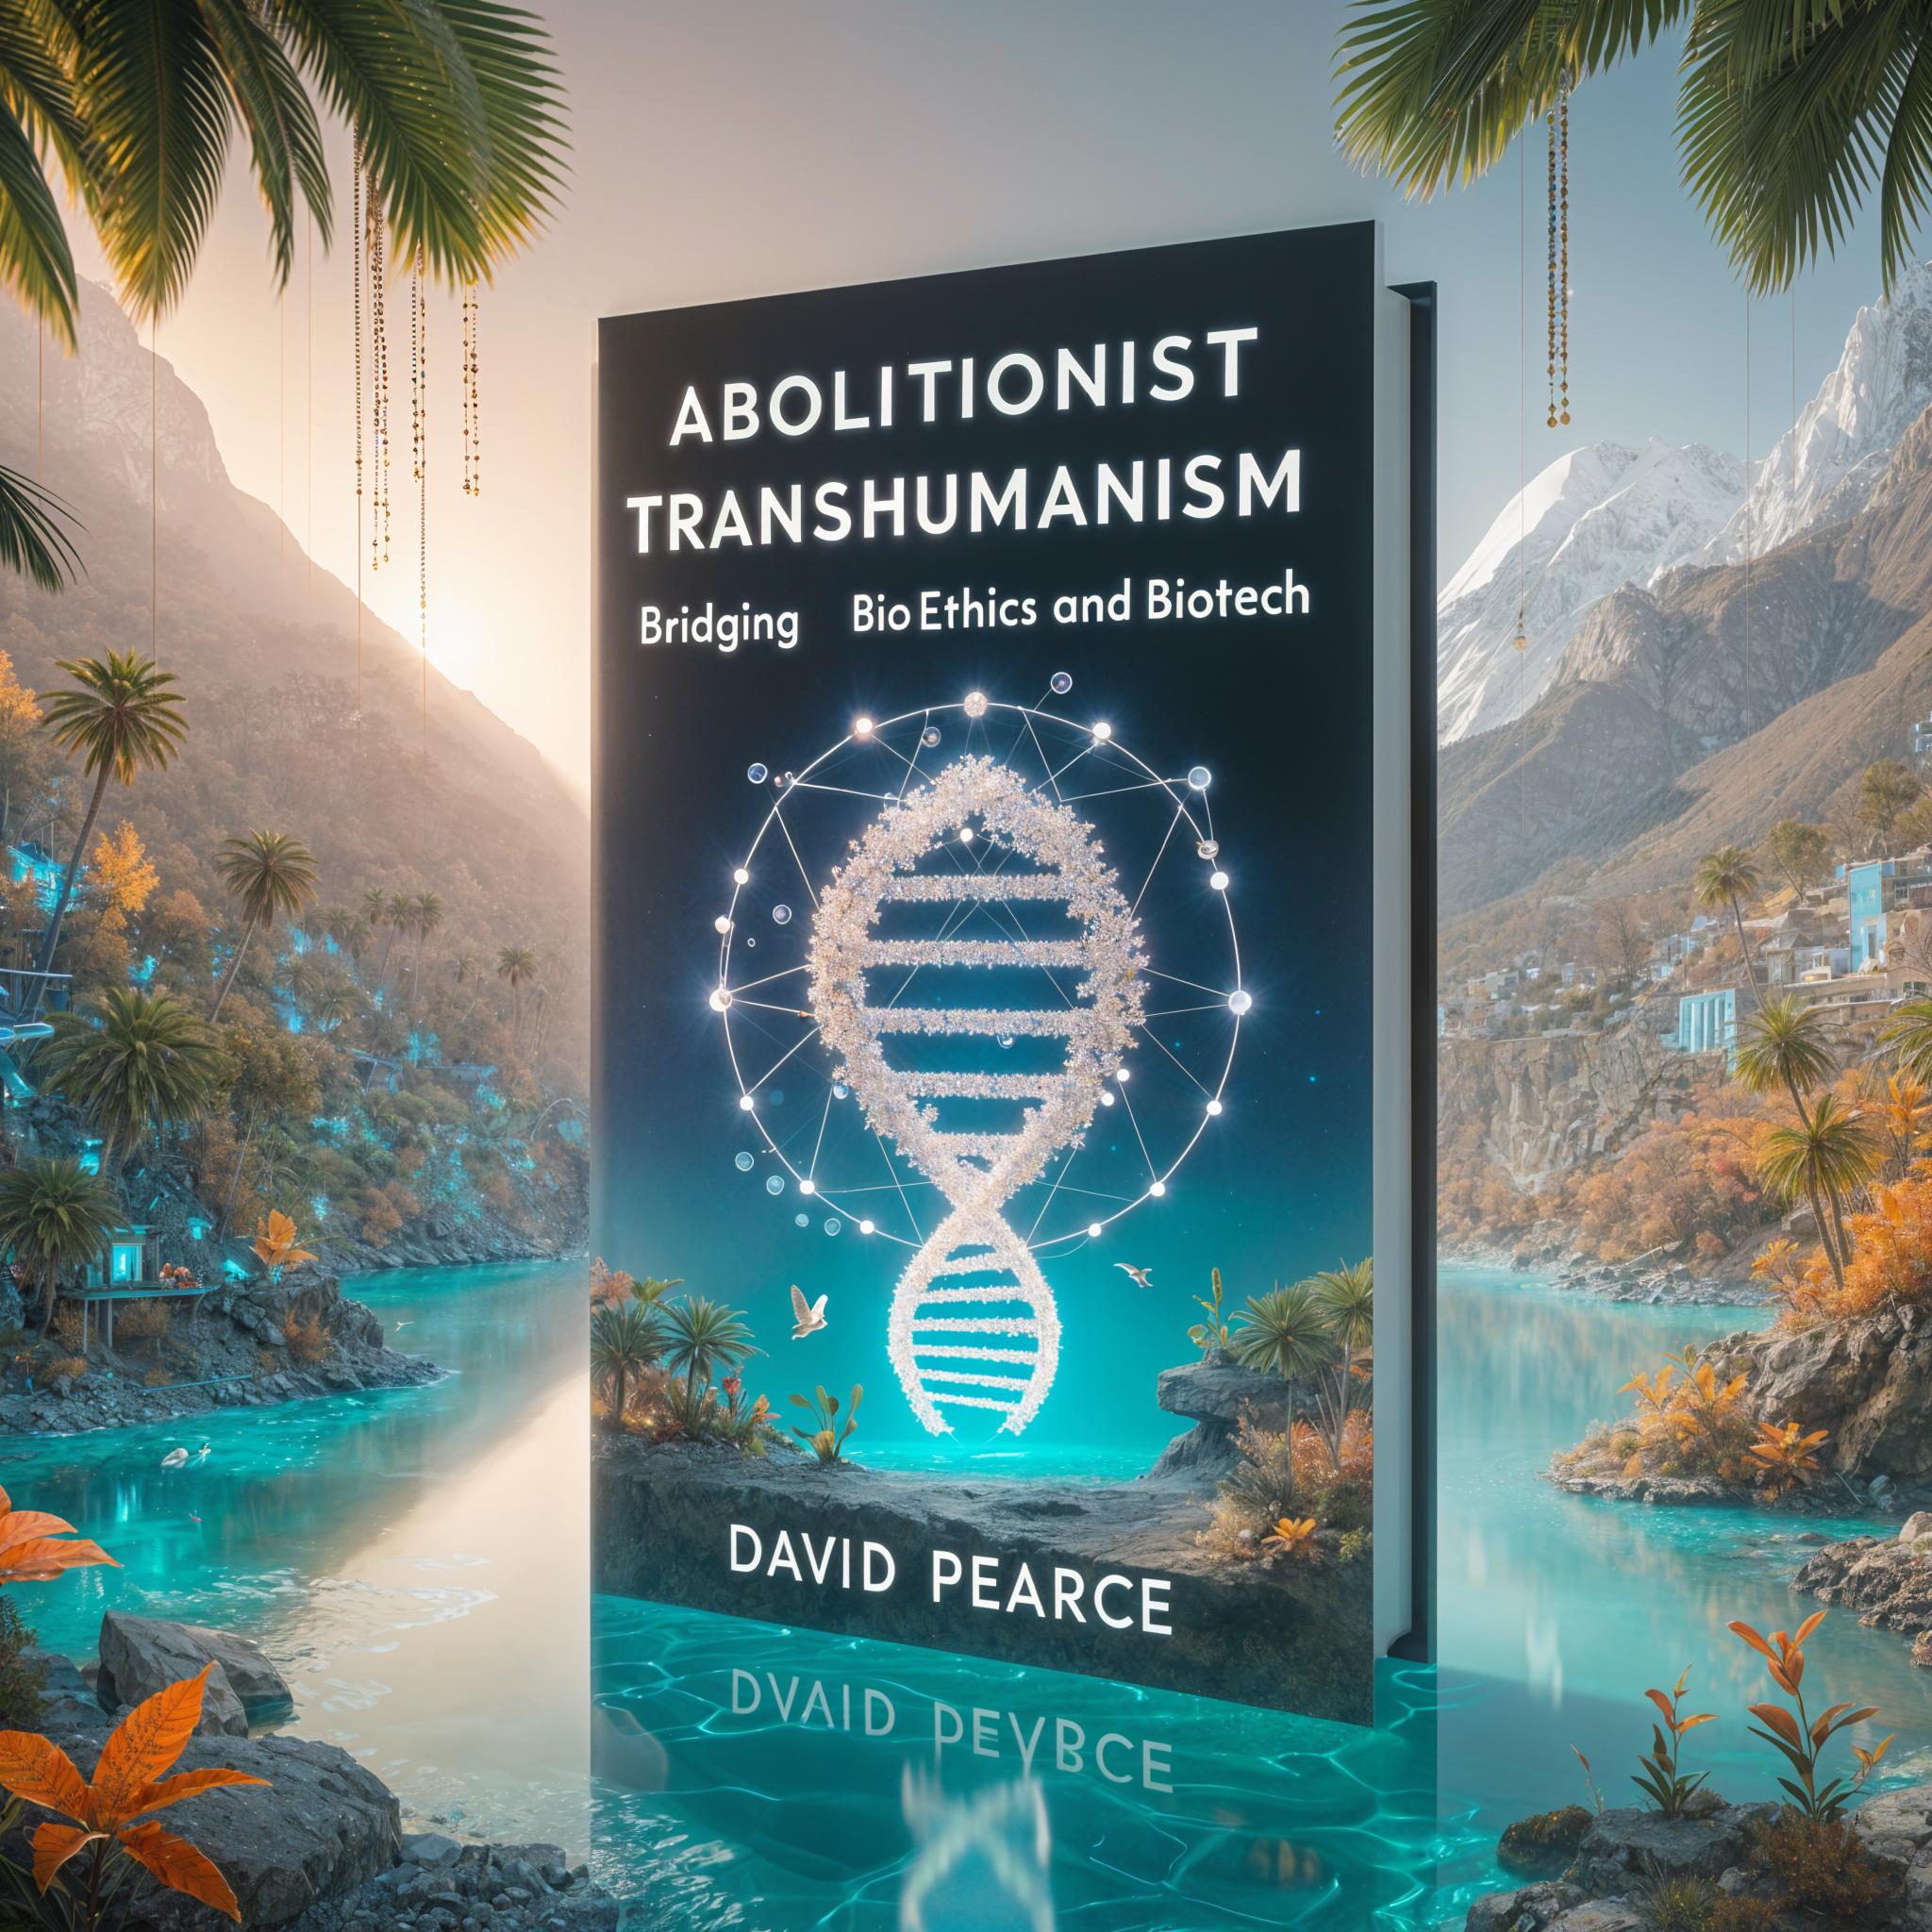 Abolitionist Transhumanism by David Pearce